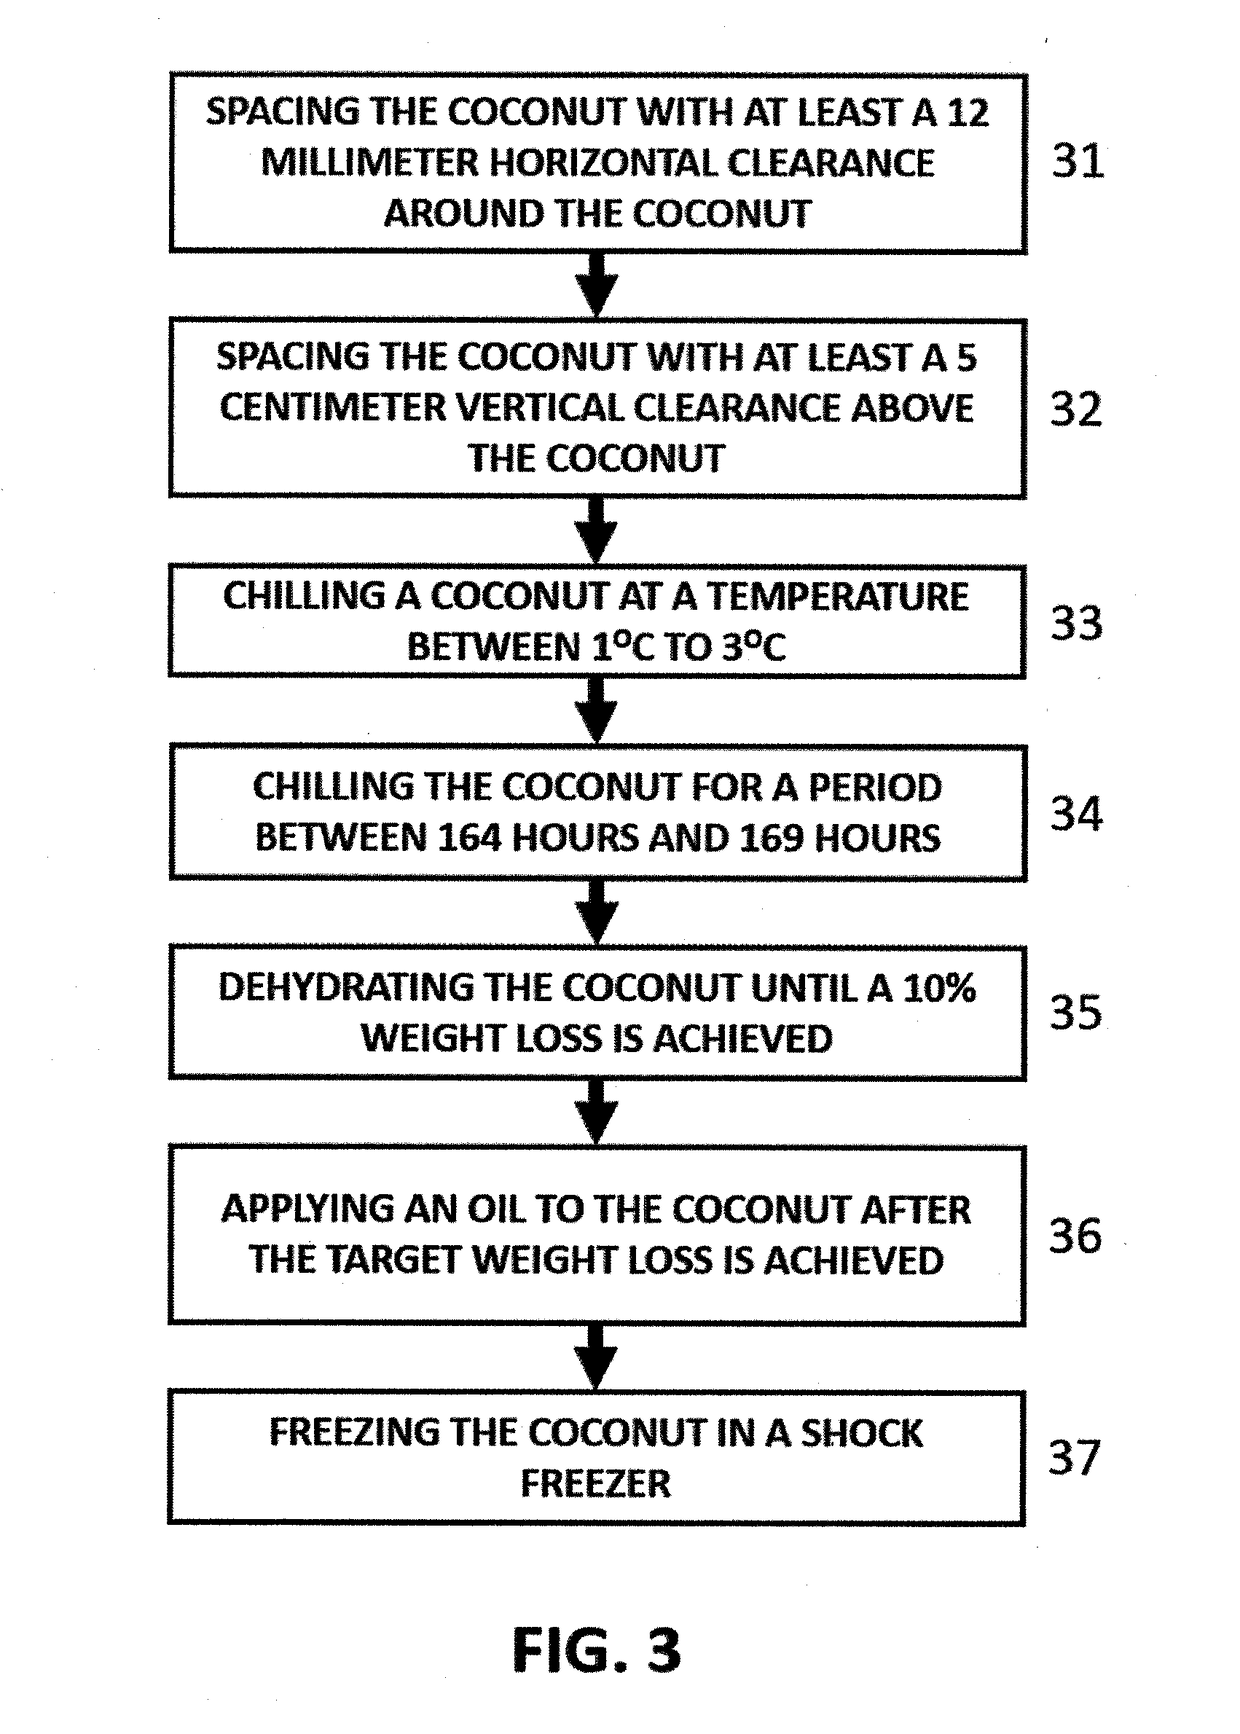 System and method for the preservation of coconut products